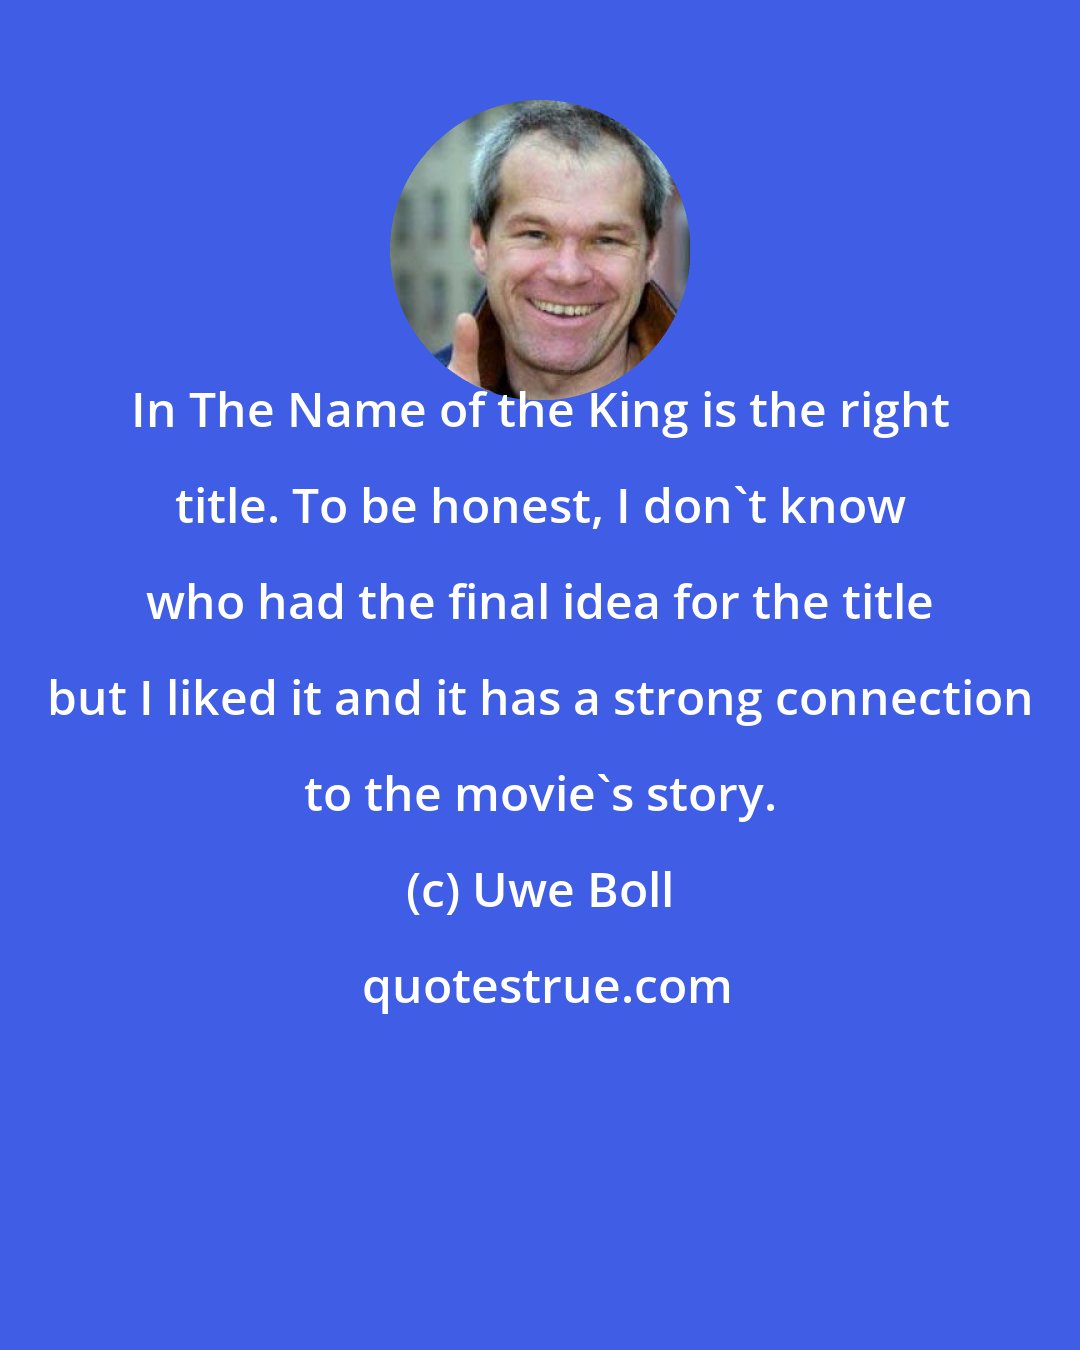 Uwe Boll: In The Name of the King is the right title. To be honest, I don't know who had the final idea for the title but I liked it and it has a strong connection to the movie's story.